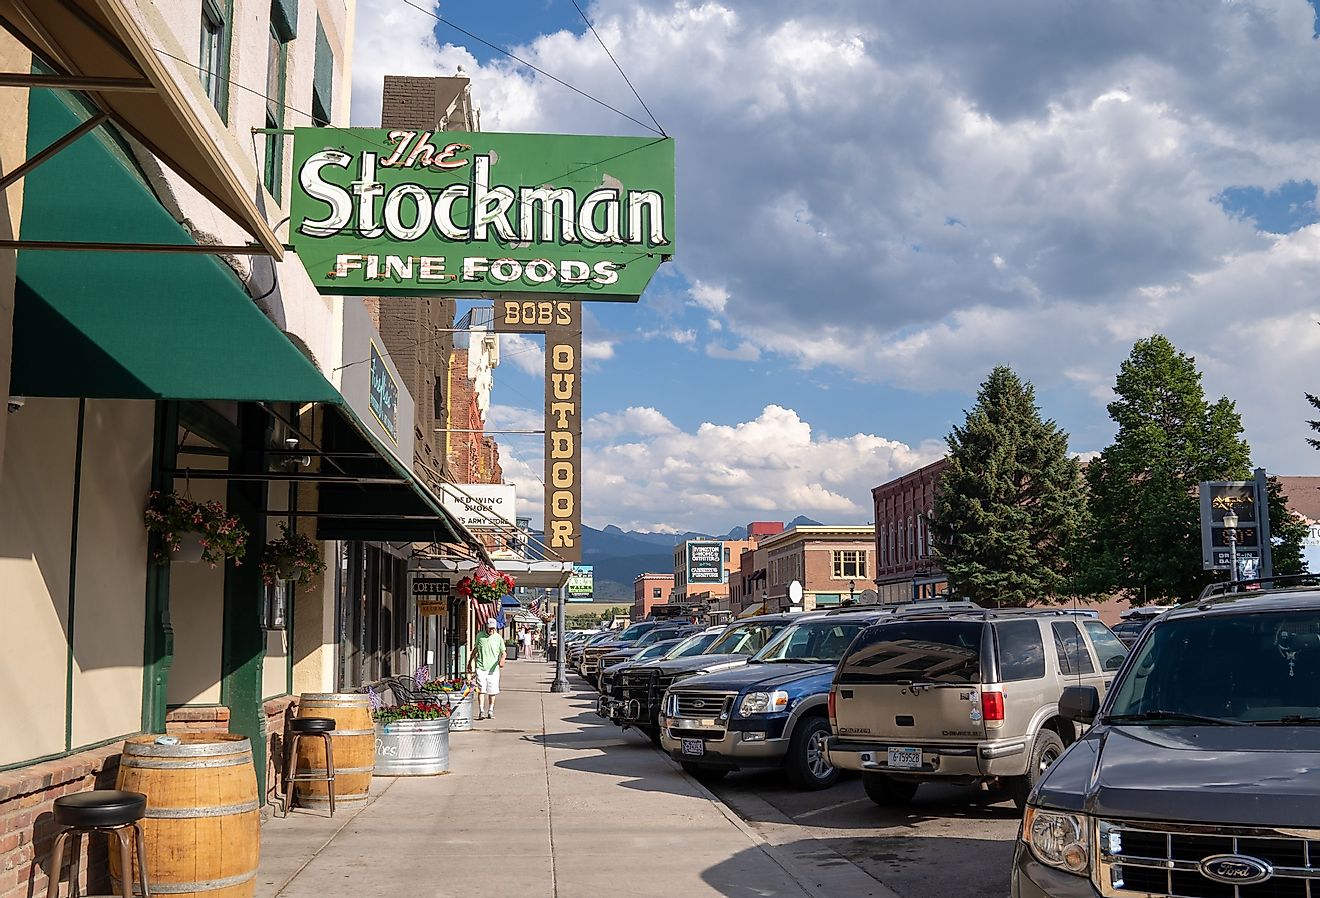 Downtown historic area, with the Stockman Fine Food in Livingston, Montana. Image credit melissamn via Shutterstock